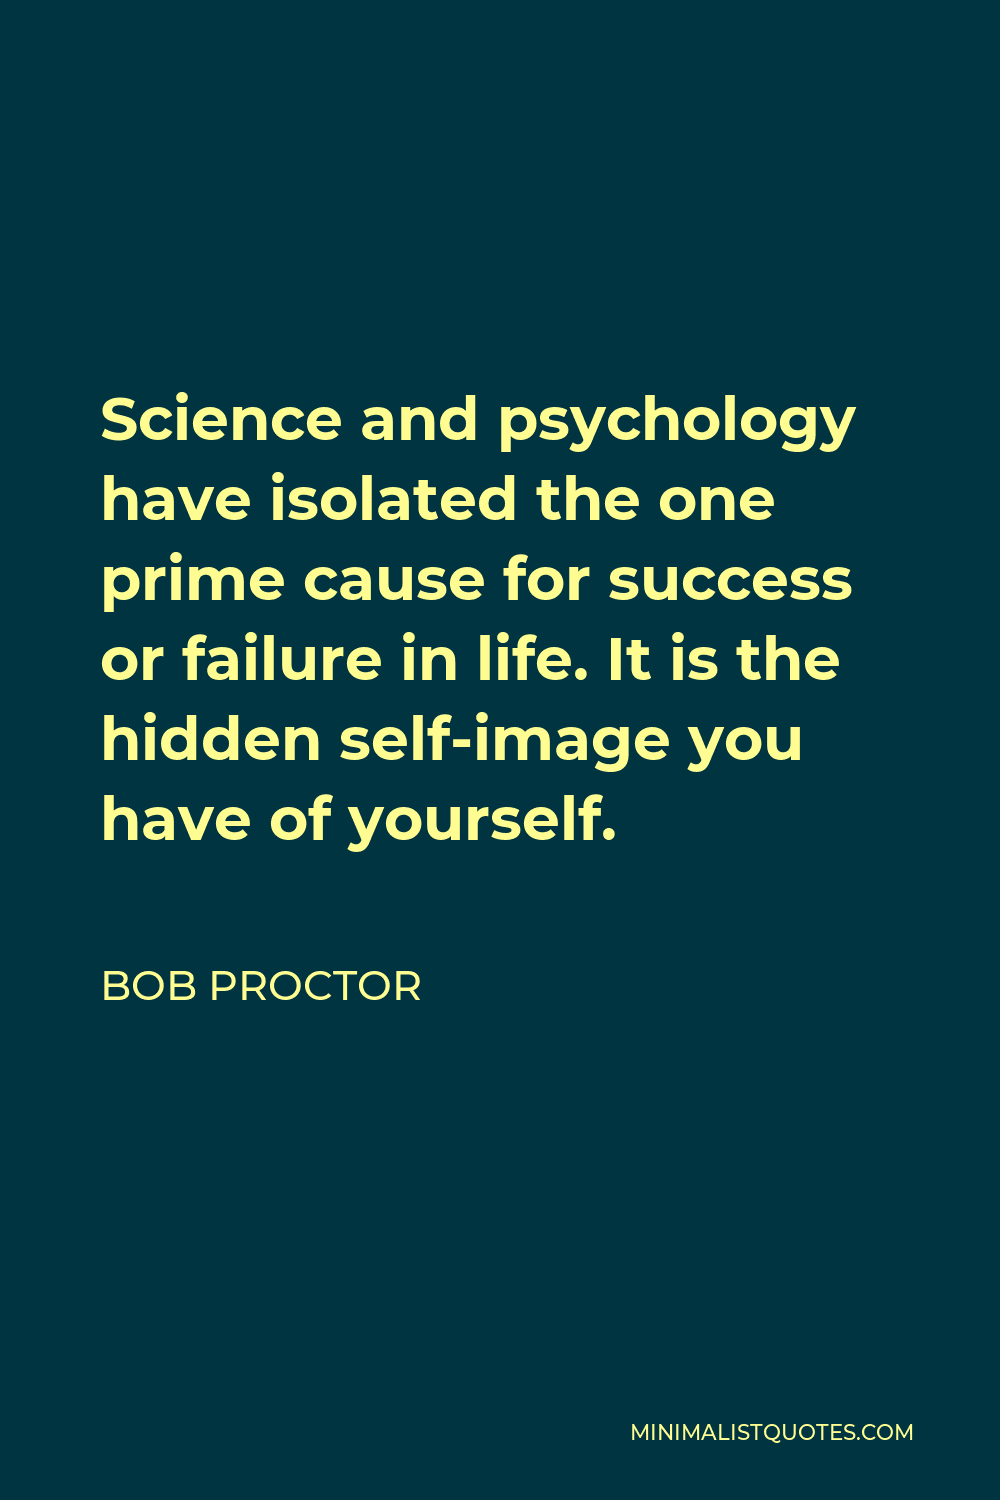 Bob Proctor Quote - Science and psychology have isolated the one prime cause for success or failure in life. It is the hidden self-image you have of yourself.